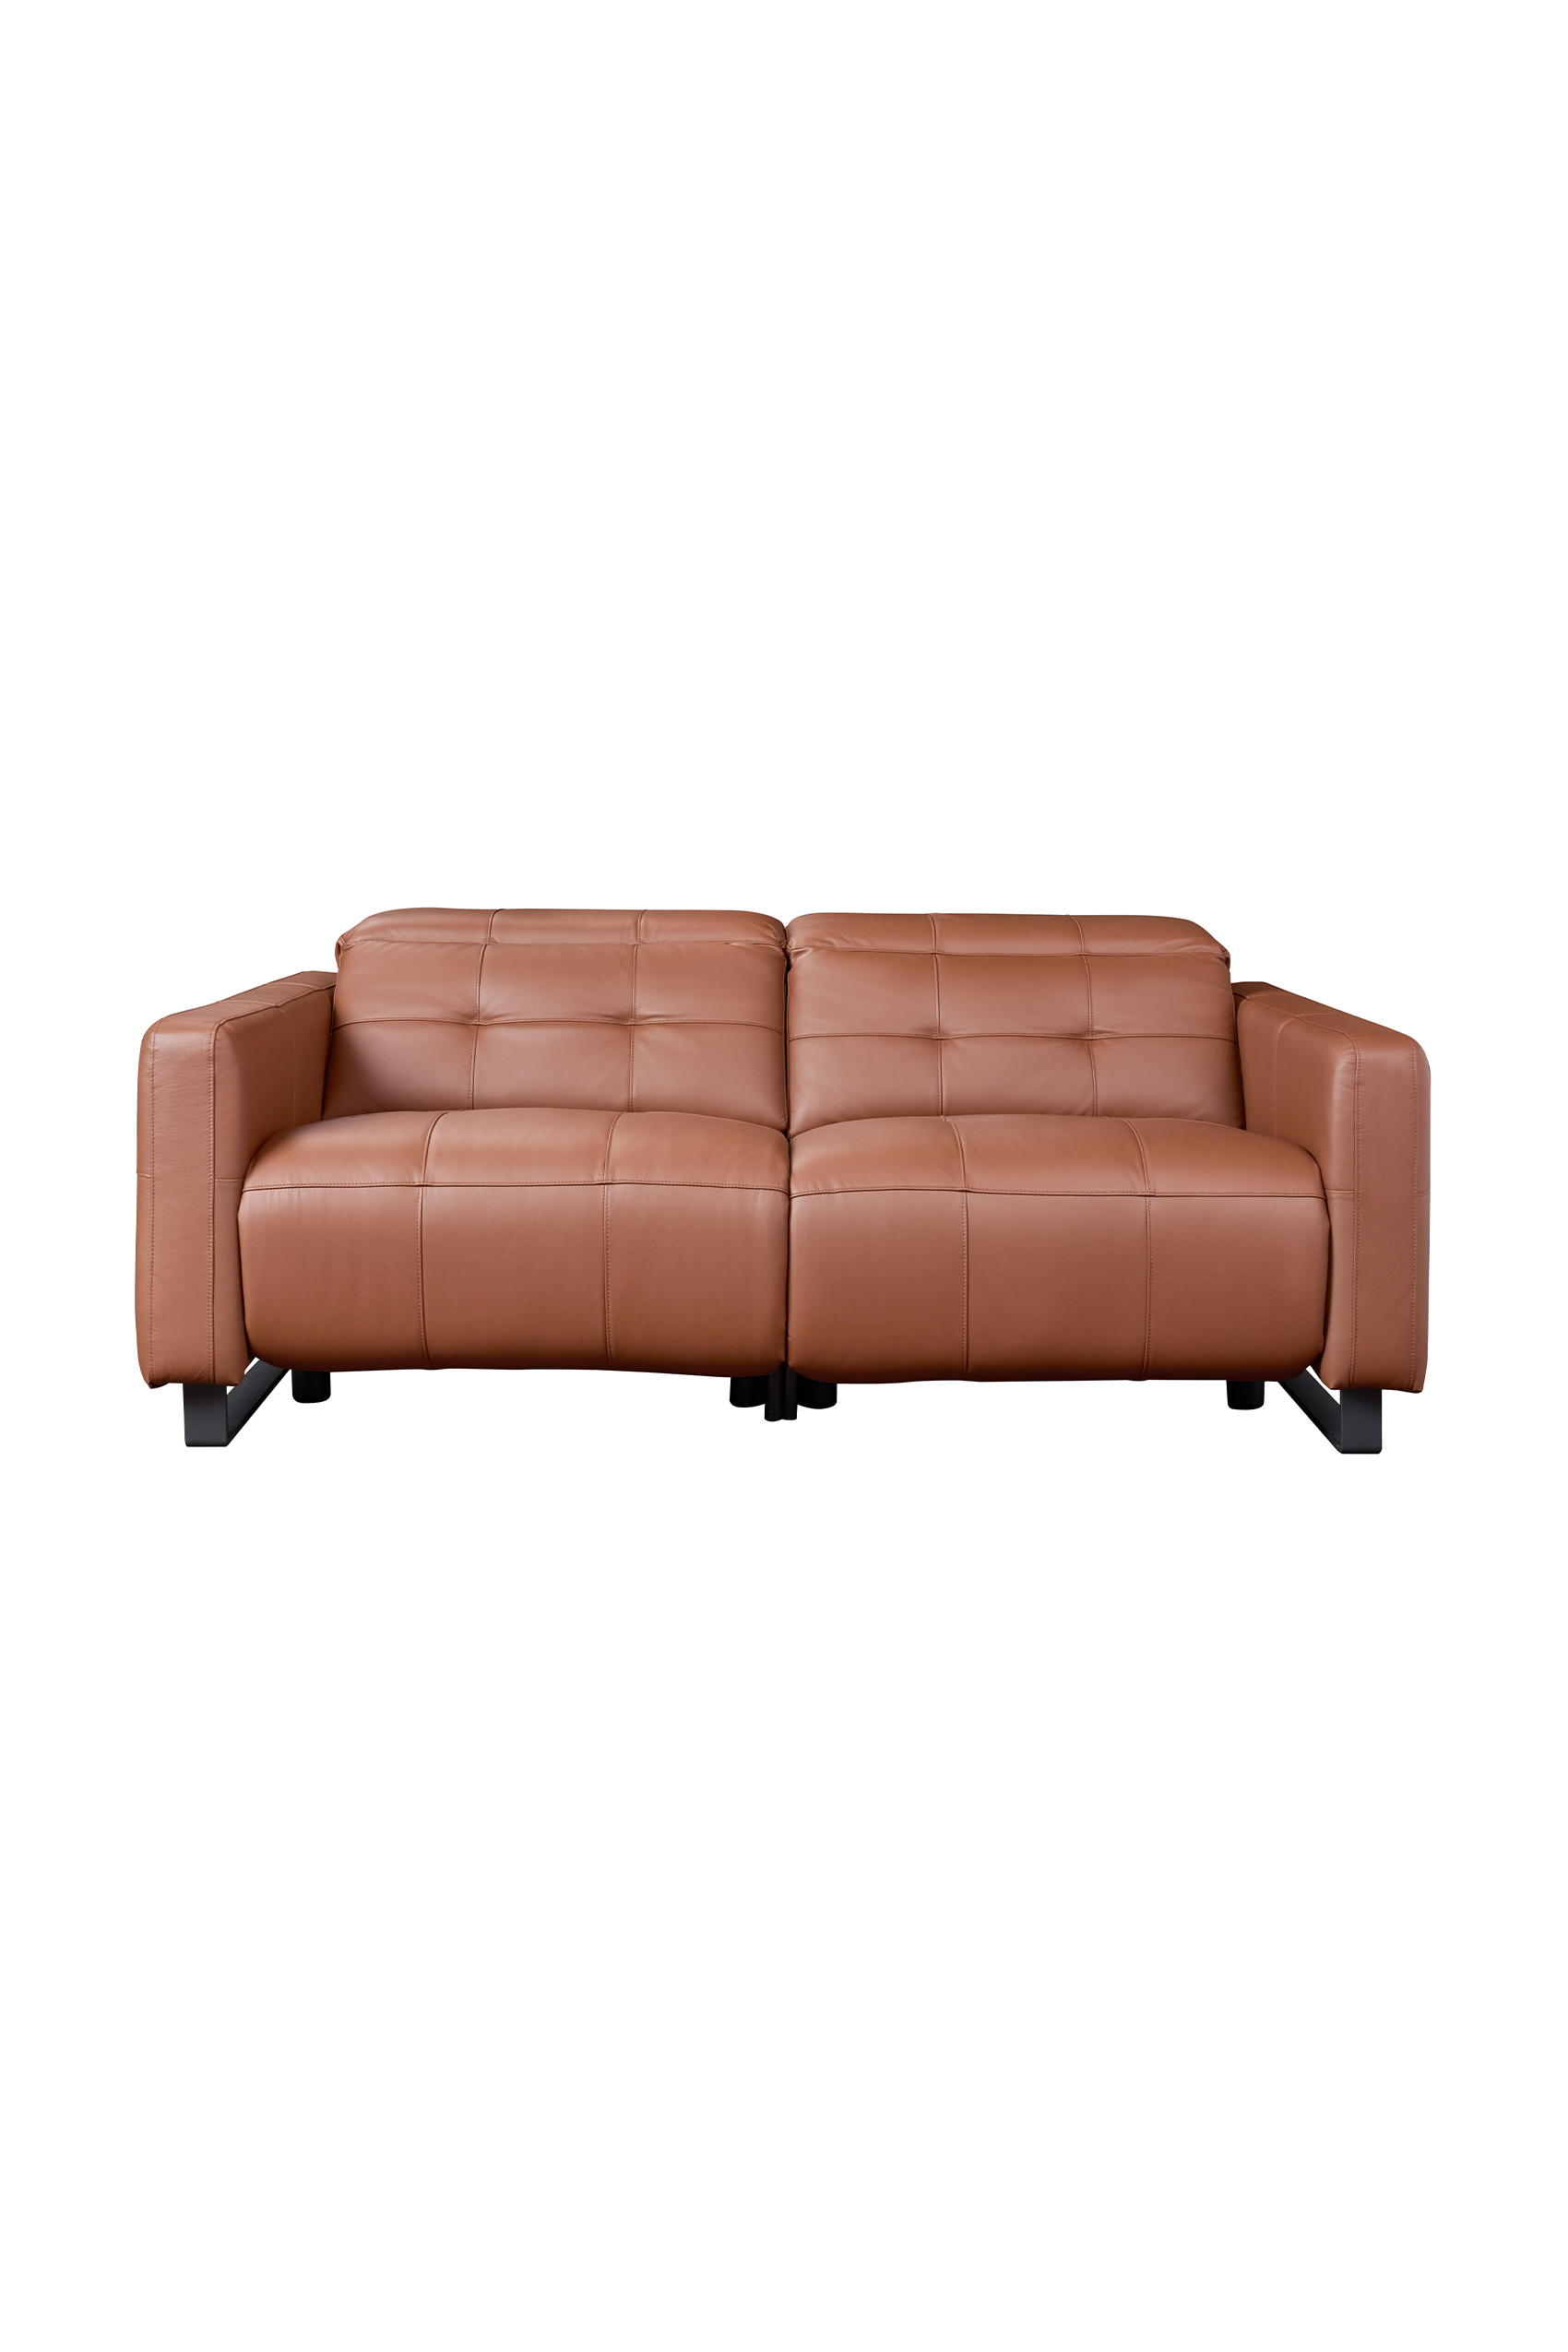 Resia Leather Sofa with Dual Recliner